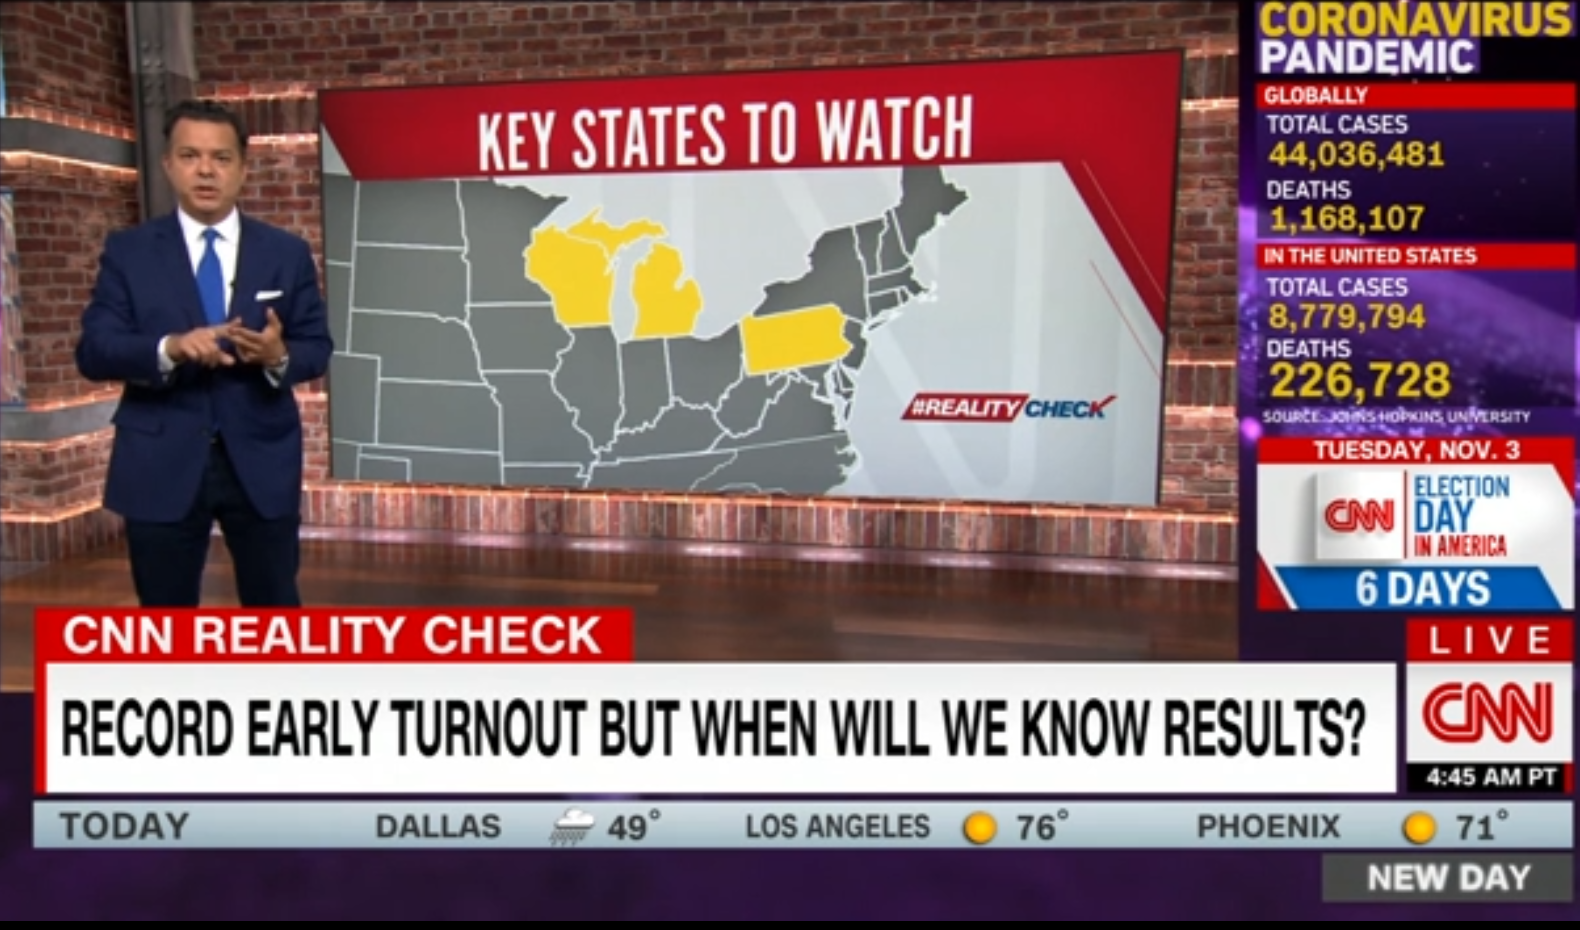 CNN: Record Early Turnout But When Will We Know Results?